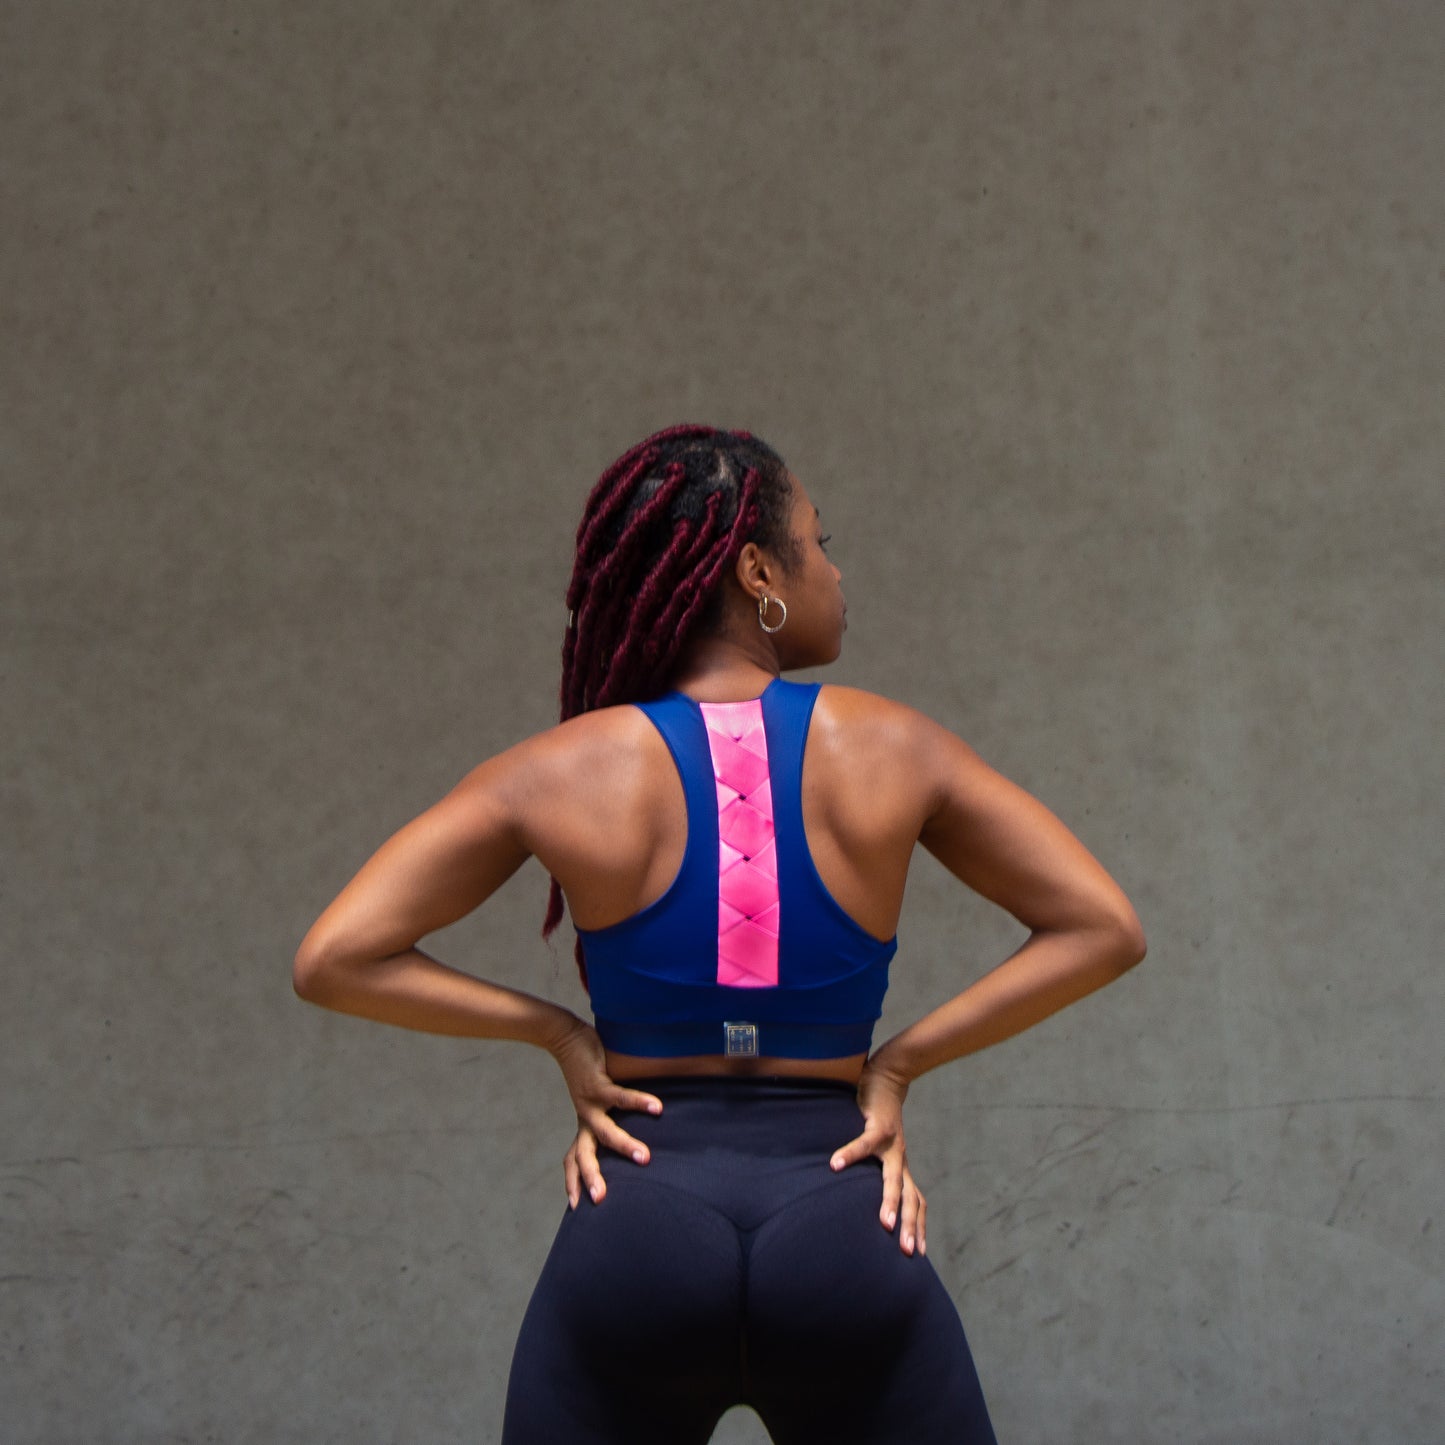 a photo of a black woman's back wearing a navy and magenta sports bra